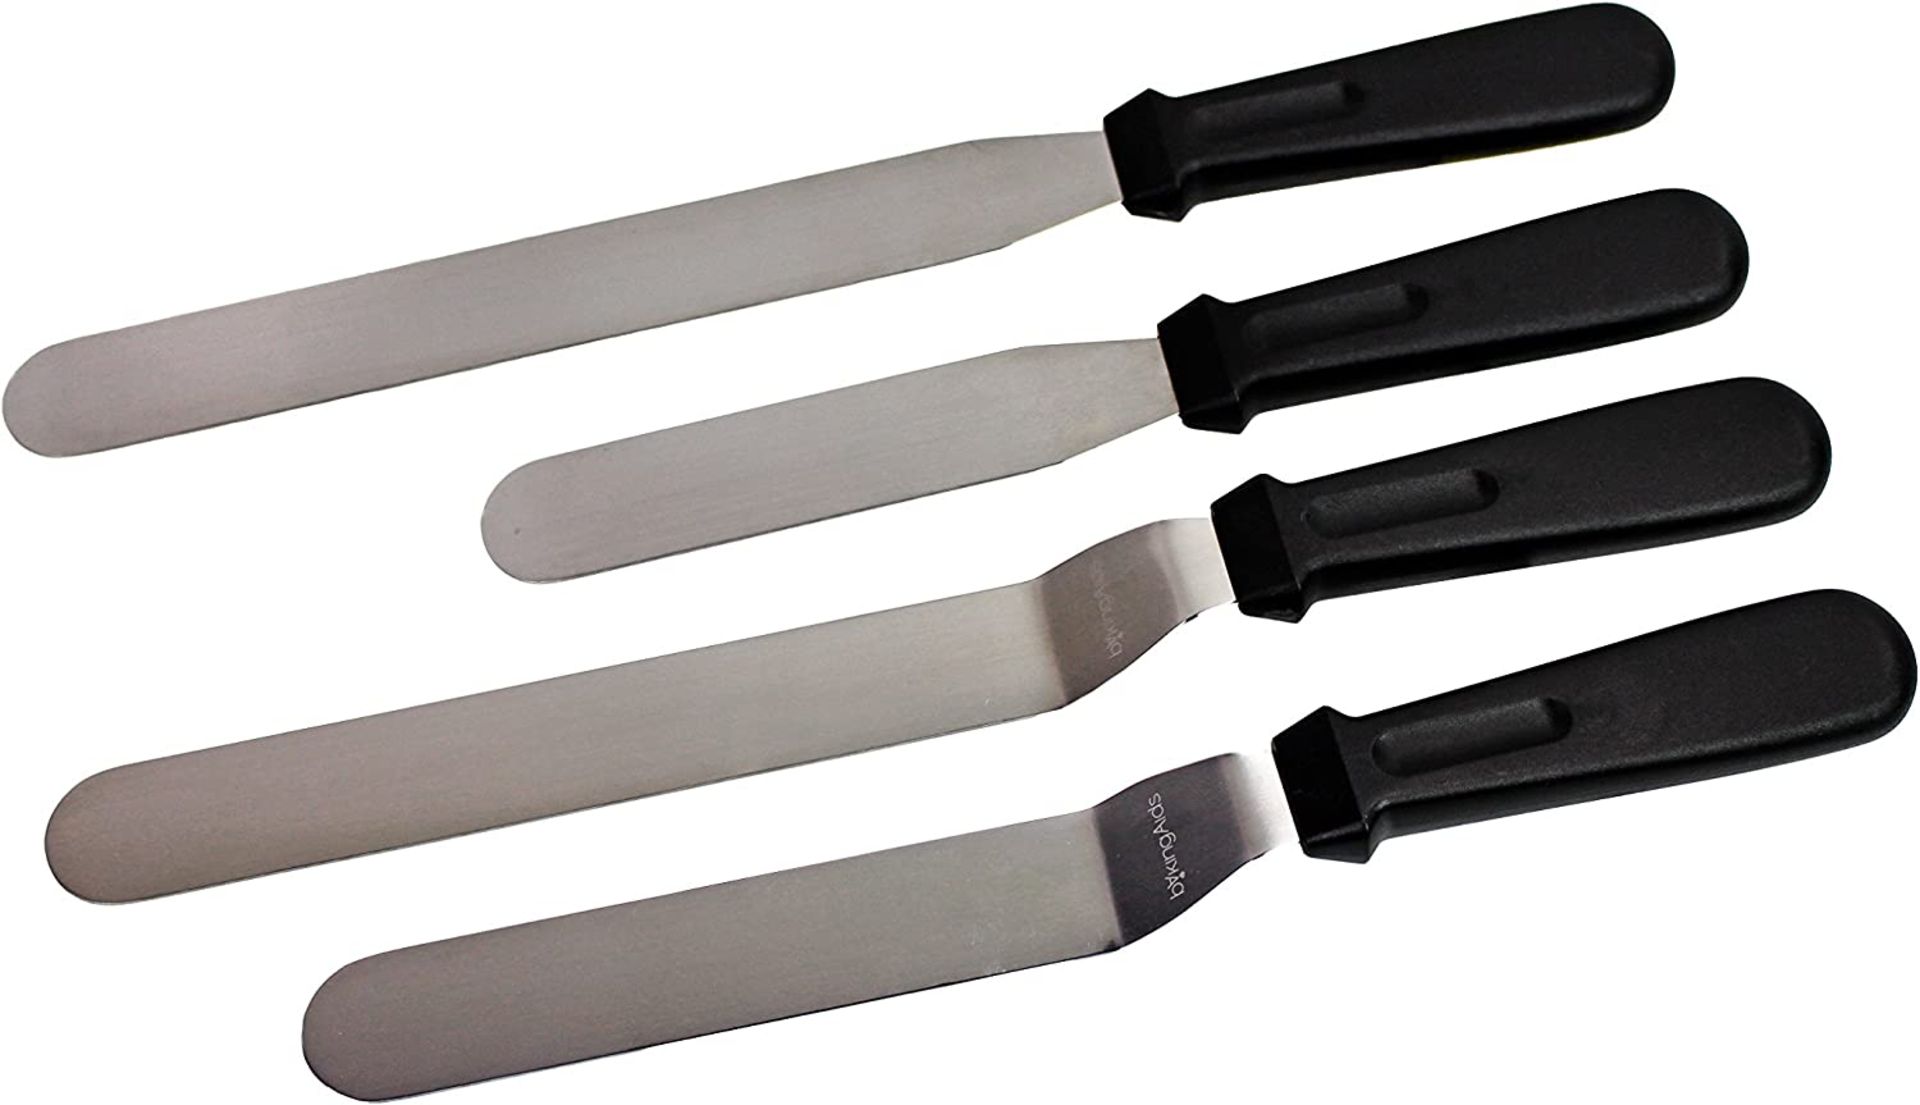 Professional 4-Piece Set of Offset & Straight Stainless Steel Icing Spatulas